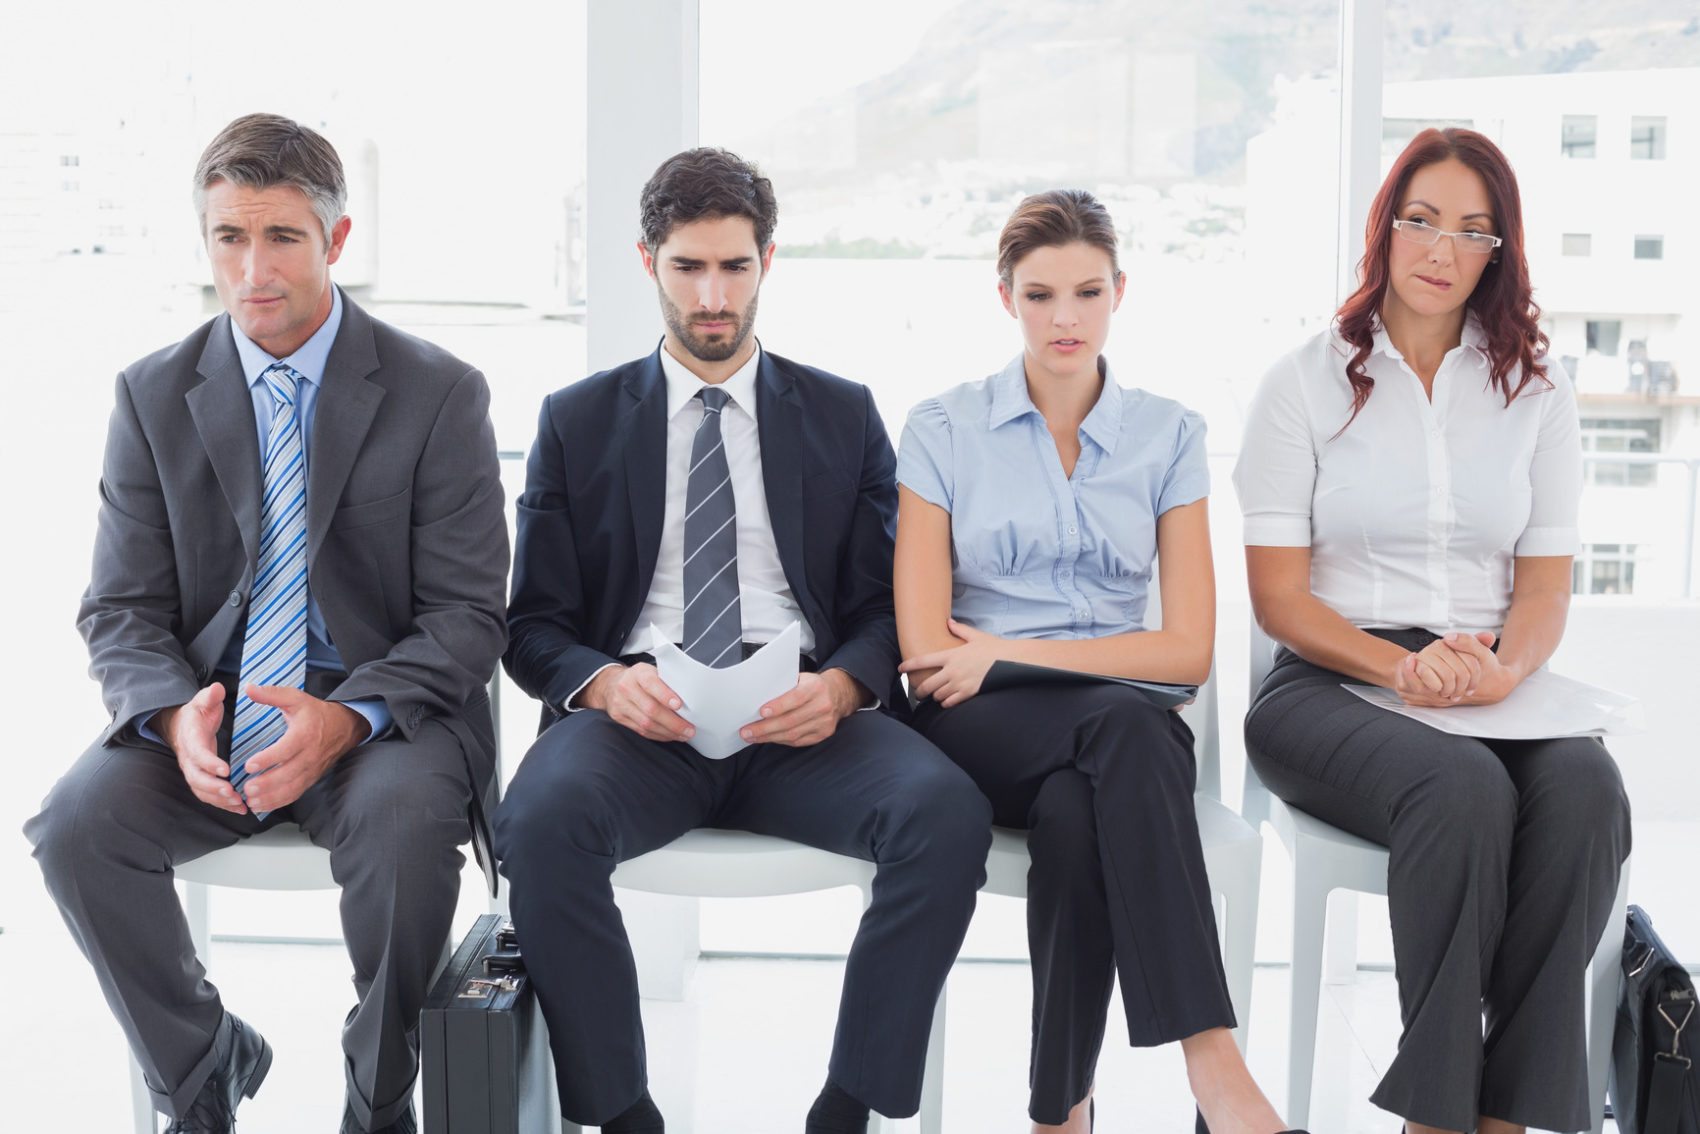 Business people sitting in a row in an office